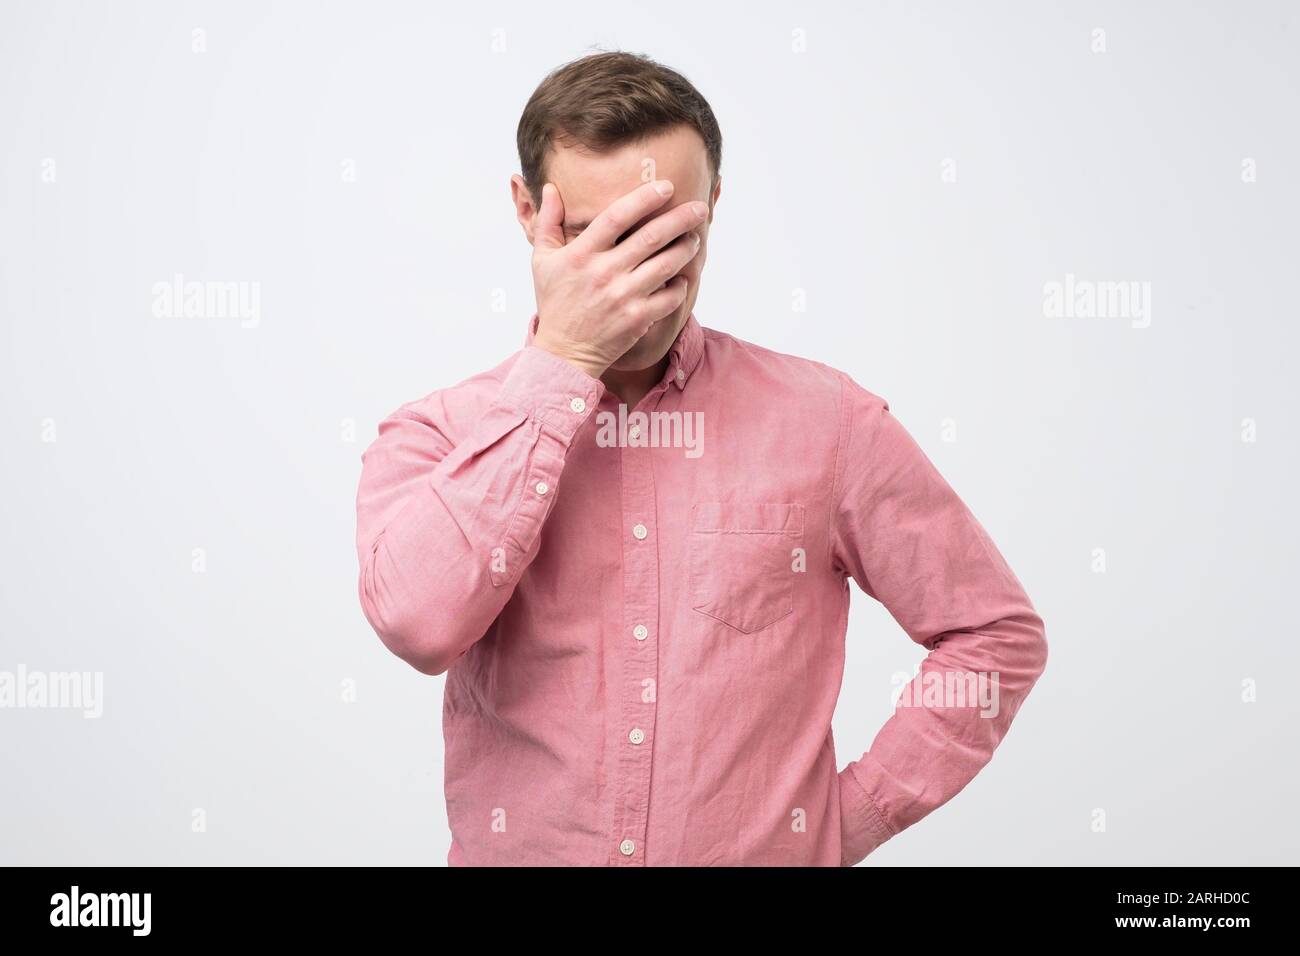 Shy embarrassed young man making faceplam gesture. Human reaction, feelings and attitude concept Stock Photo